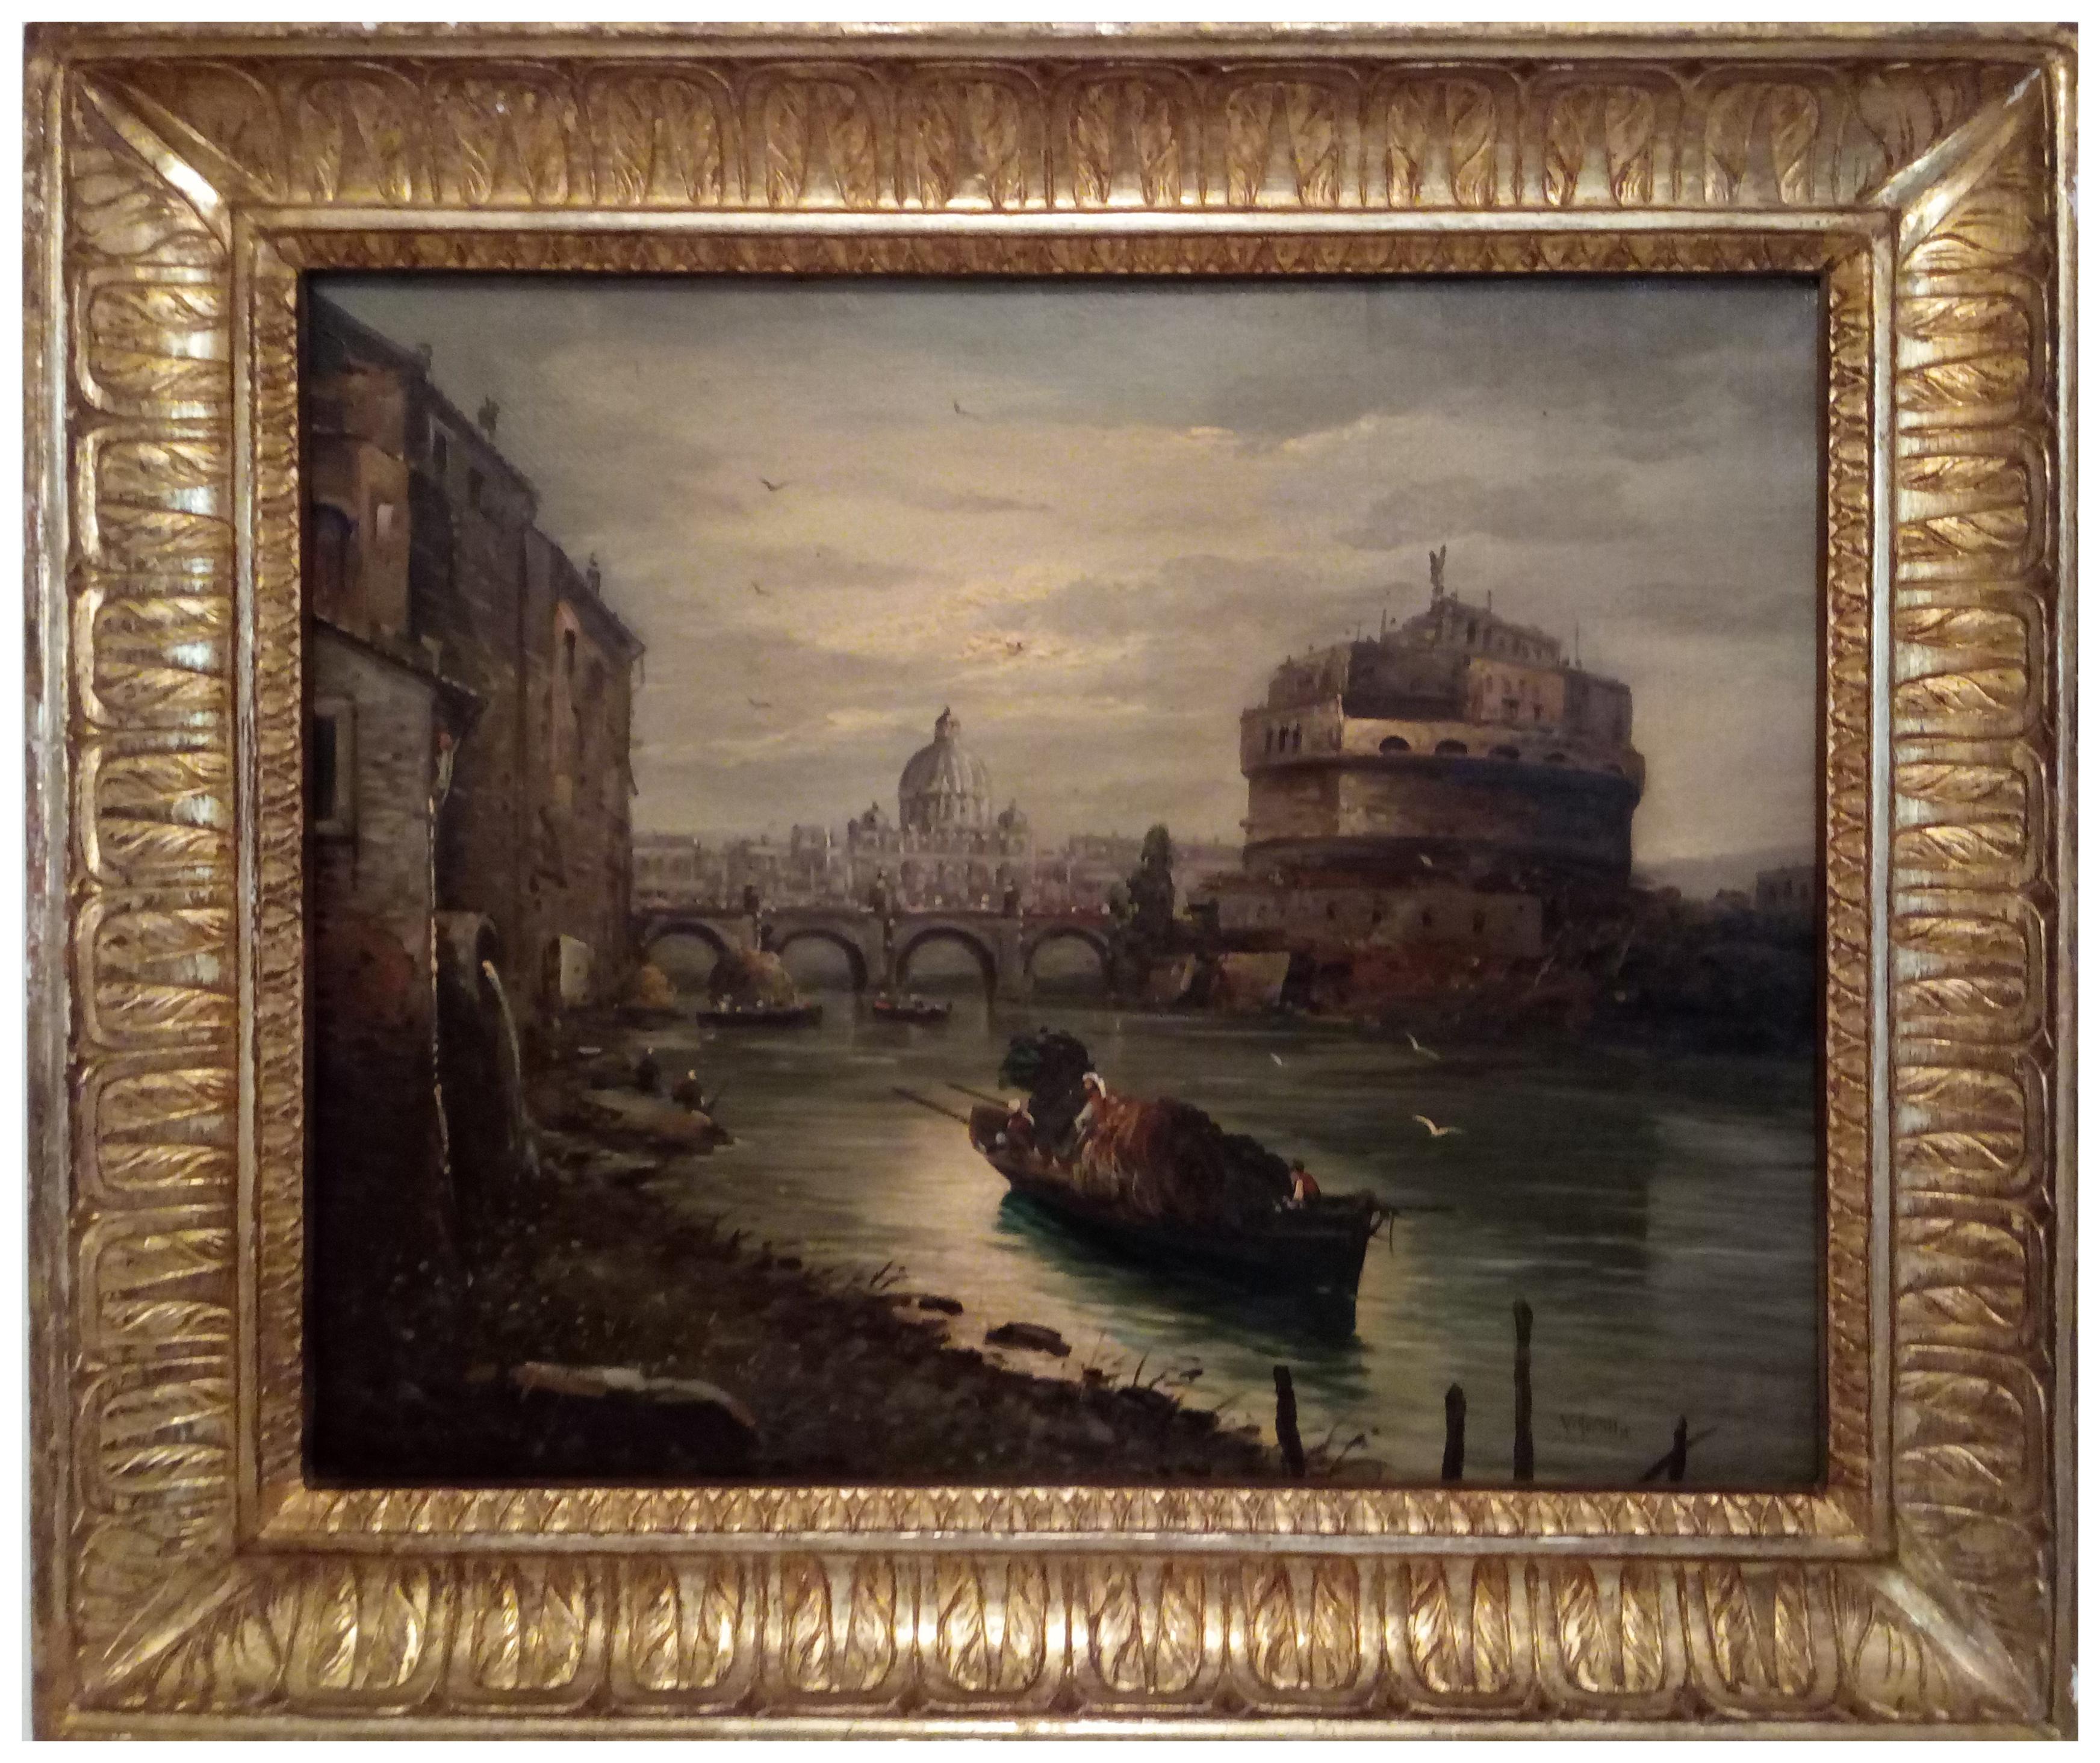 Vincenzo Montella Landscape Painting - ROME - In the Manner of G. Vanvitelli -Italian Landscape Oil on Canvas Painting